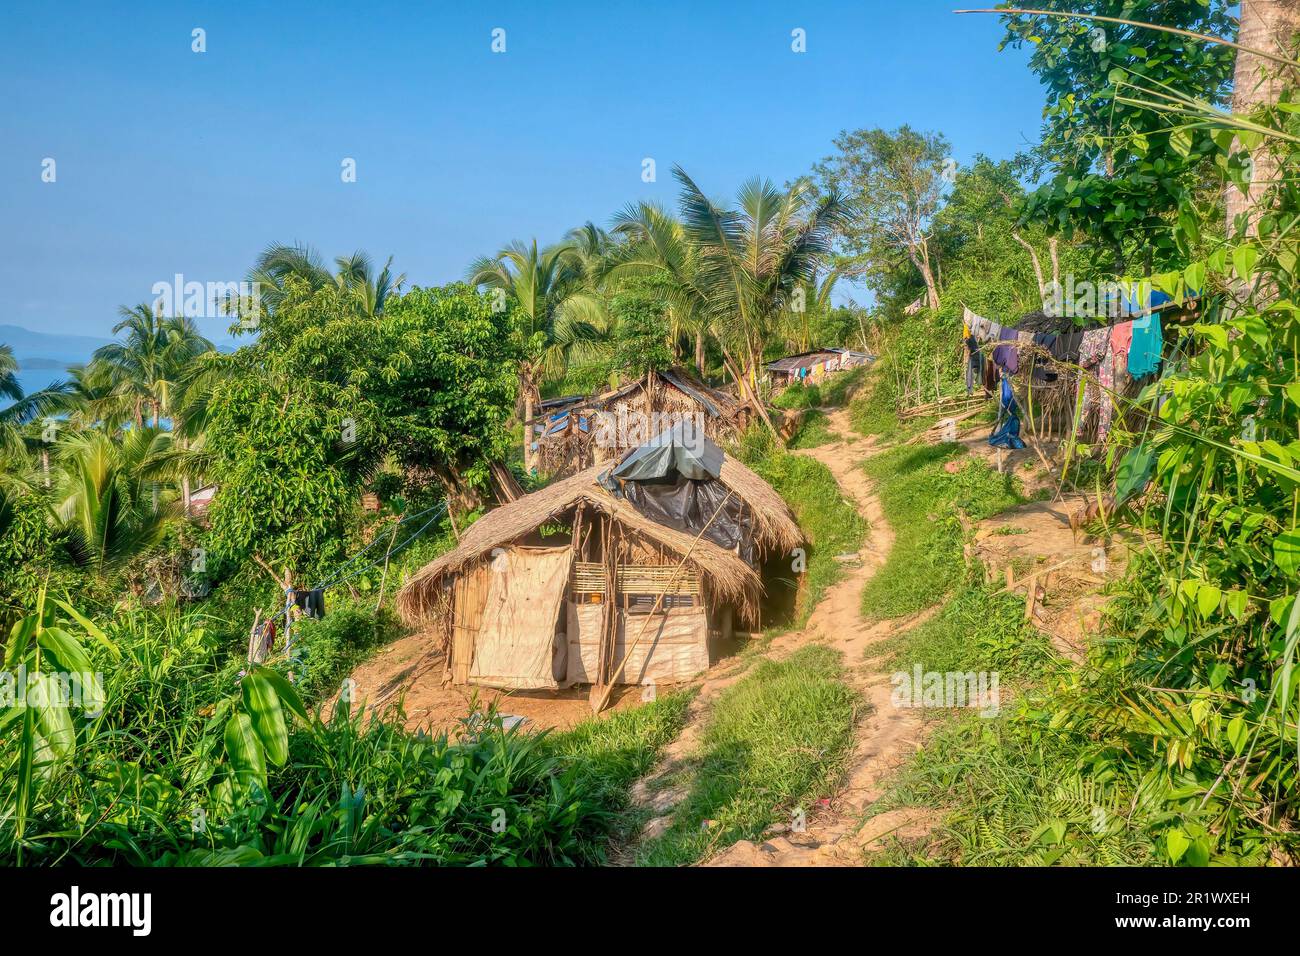 Thatched huts in a small indigenous Mangyan tribal village on a hillside on Mindoro Island, Philippines. The small homes have no electricity or water. Stock Photo